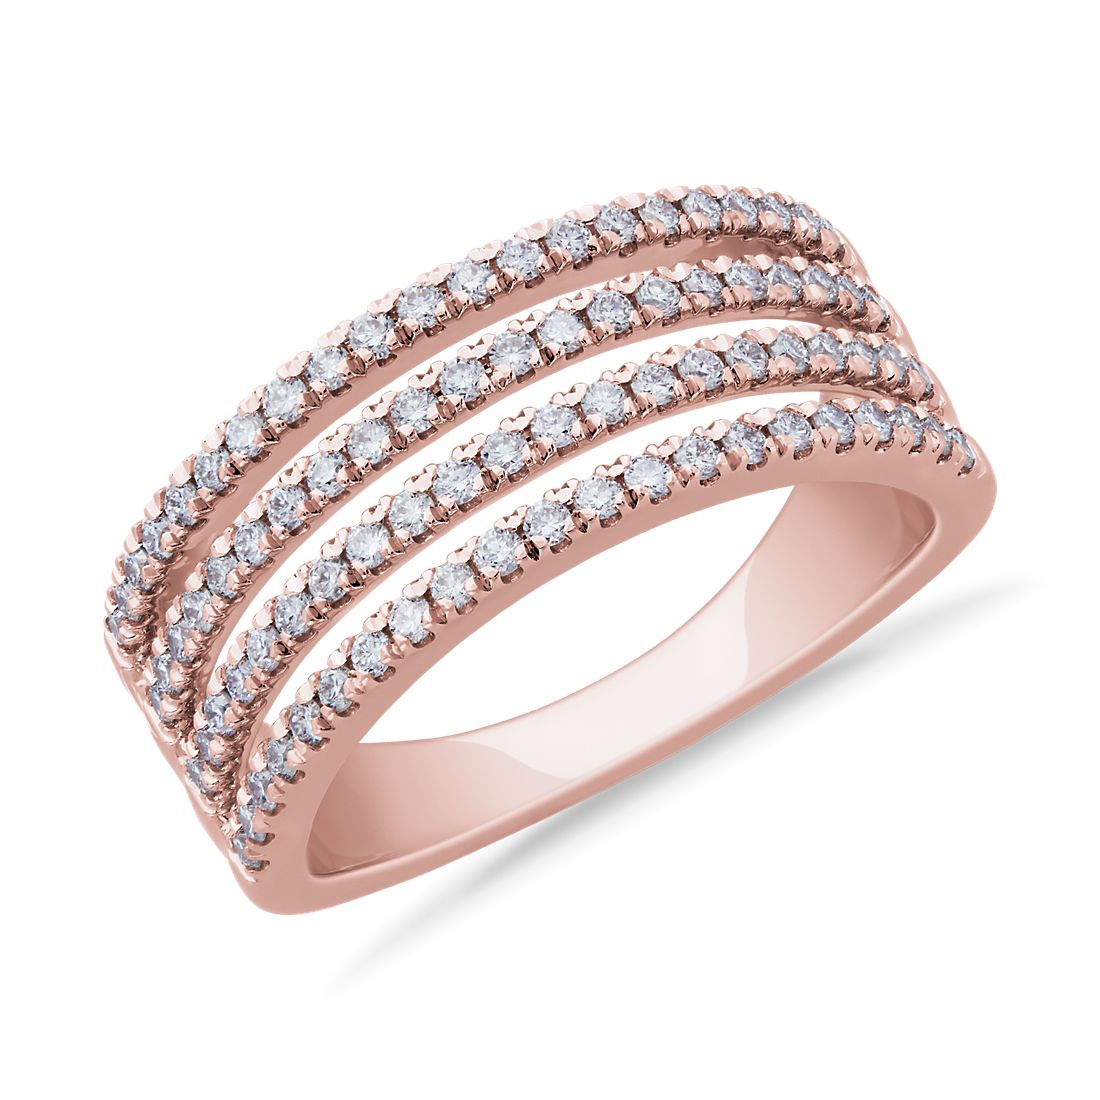 Quad Stacked Diamond Pavé Ring in 18k Rose Gold (1/2 ct. tw.)